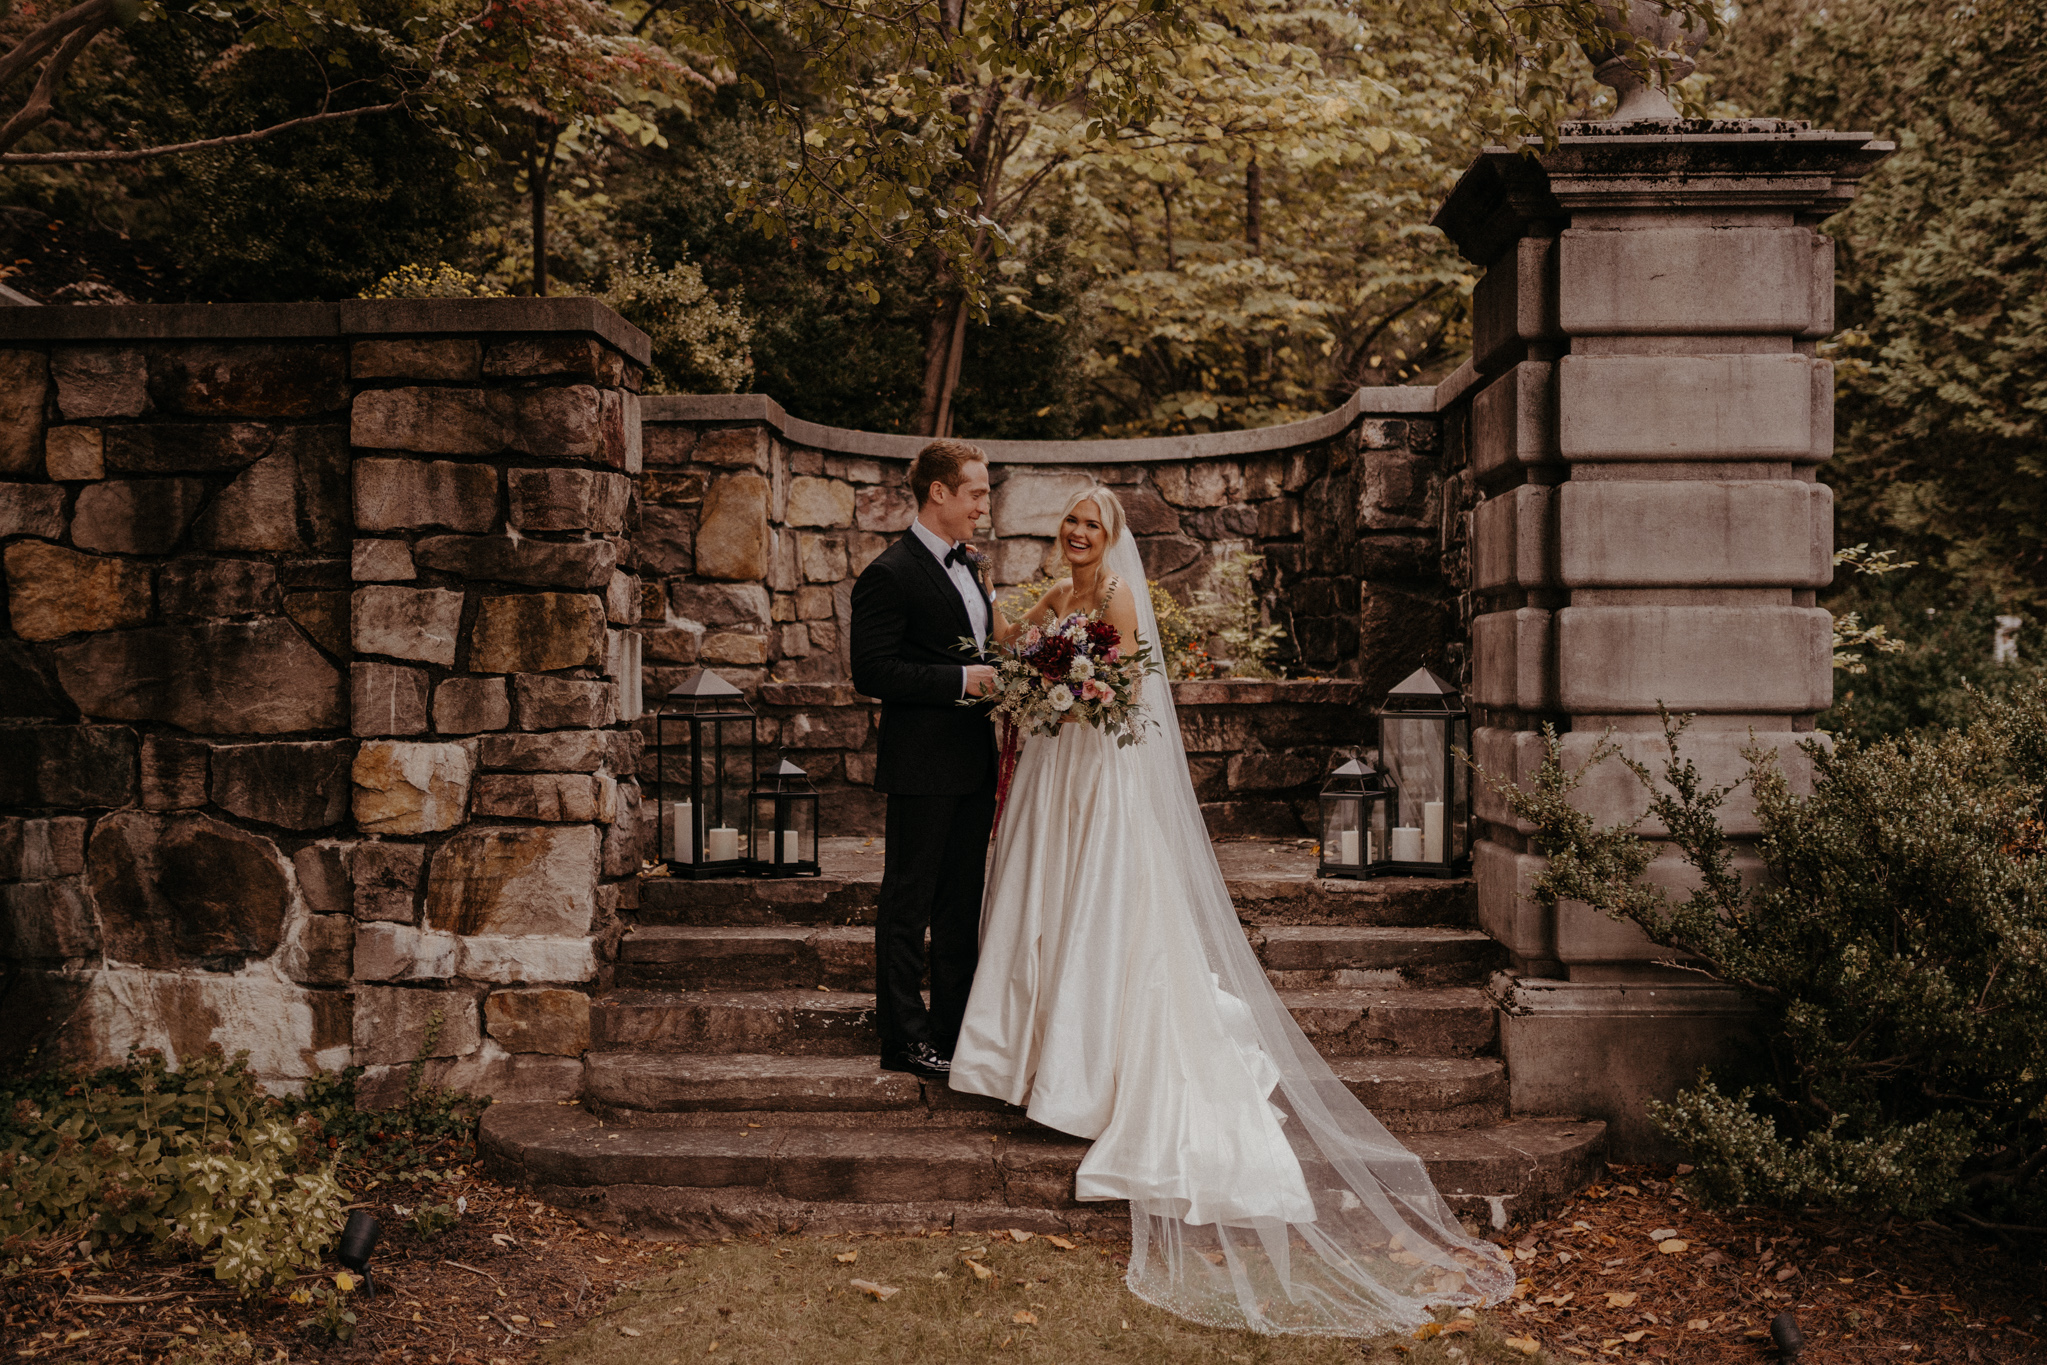 Jewel-toned fall wedding at Strong Mansion in Frederick, Maryland by relaxed organic wedding photographer